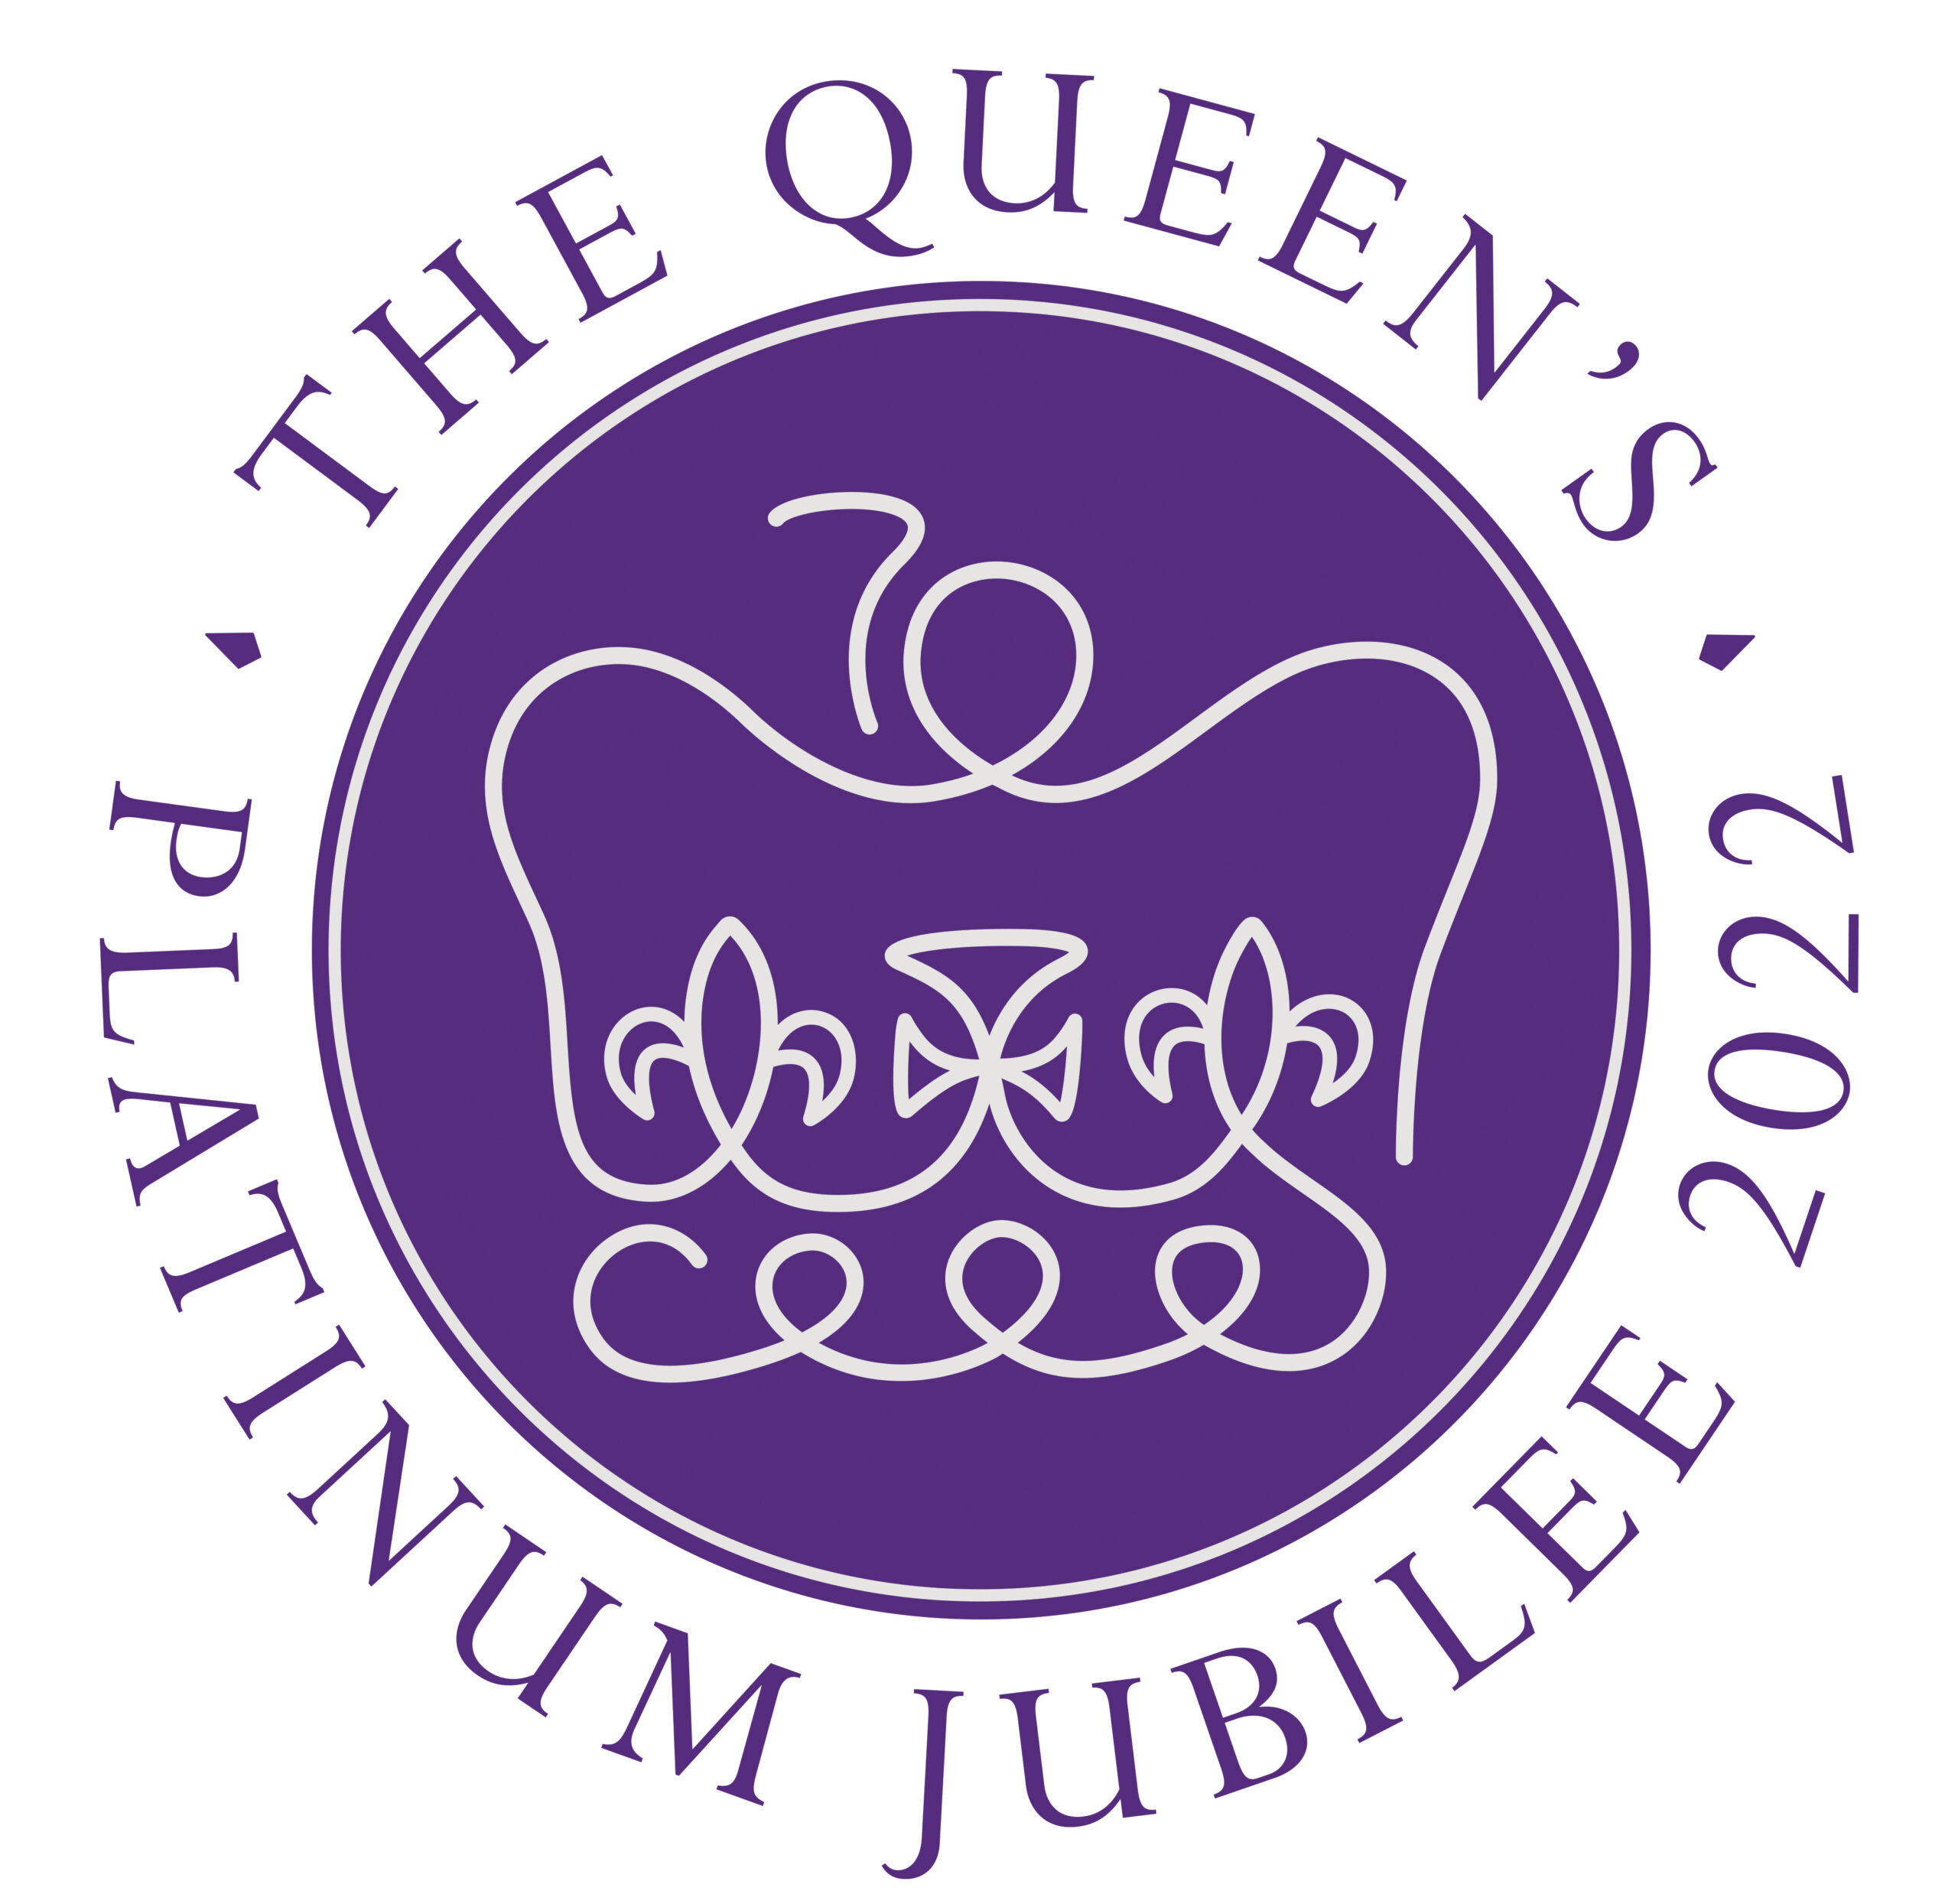 Platinum Jubilee logo takes centre stage in new V&A exhibit Royal Central